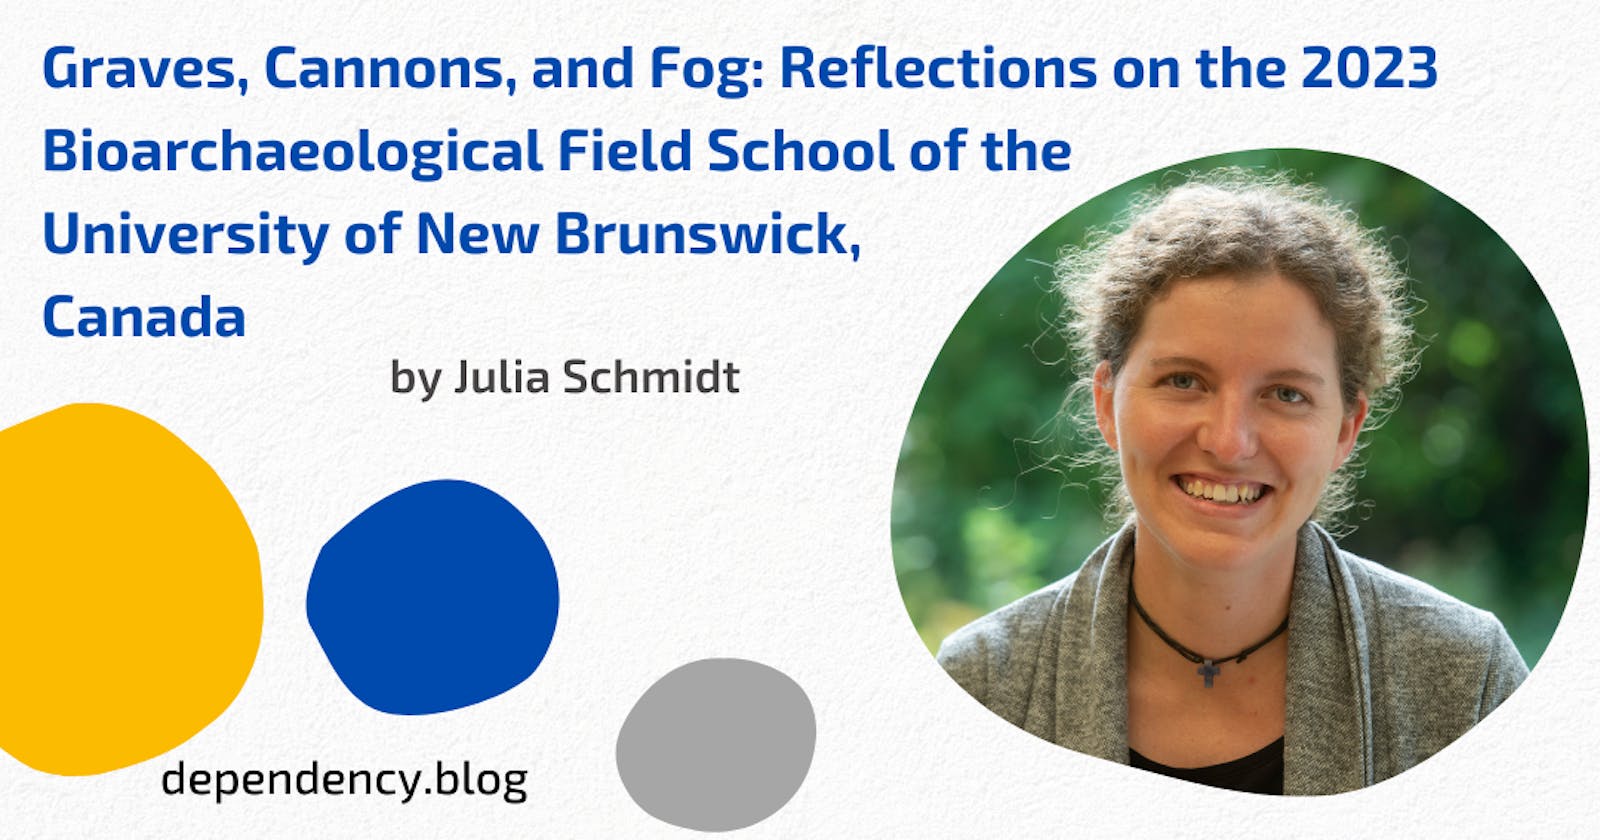 Graves, Cannons, and Fog: Reflections on the 2023 Bioarchaeological Field School of the University of New Brunswick, Canada